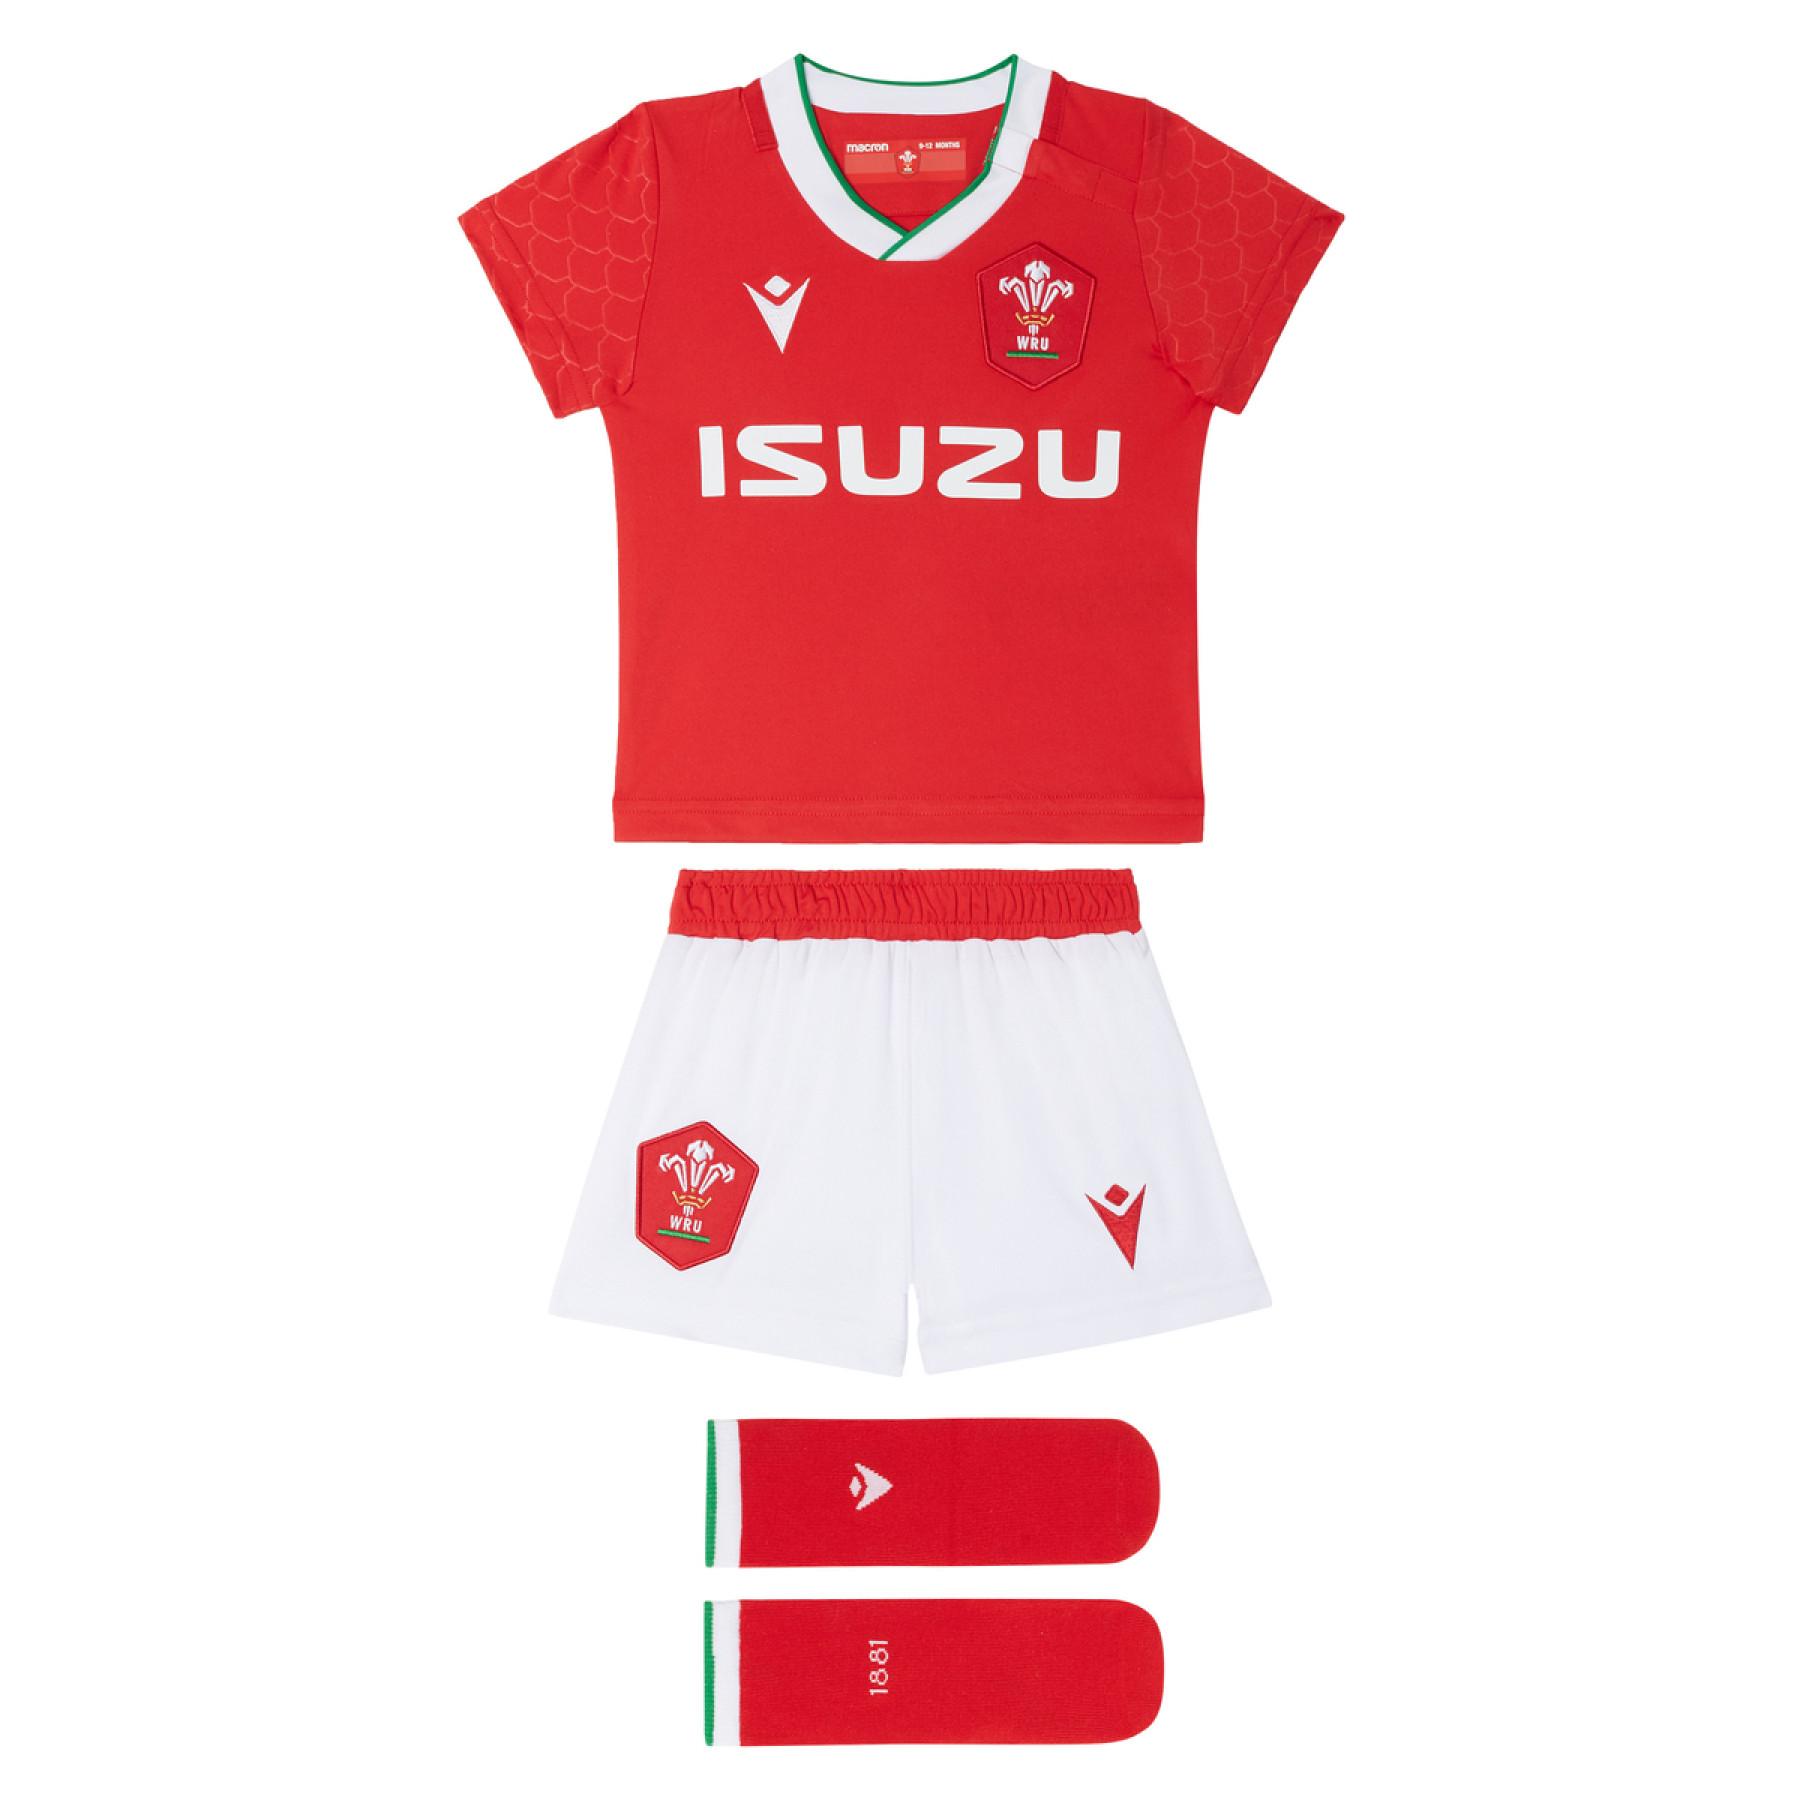 Home kit baby Pays de Galles rugby 2020/21